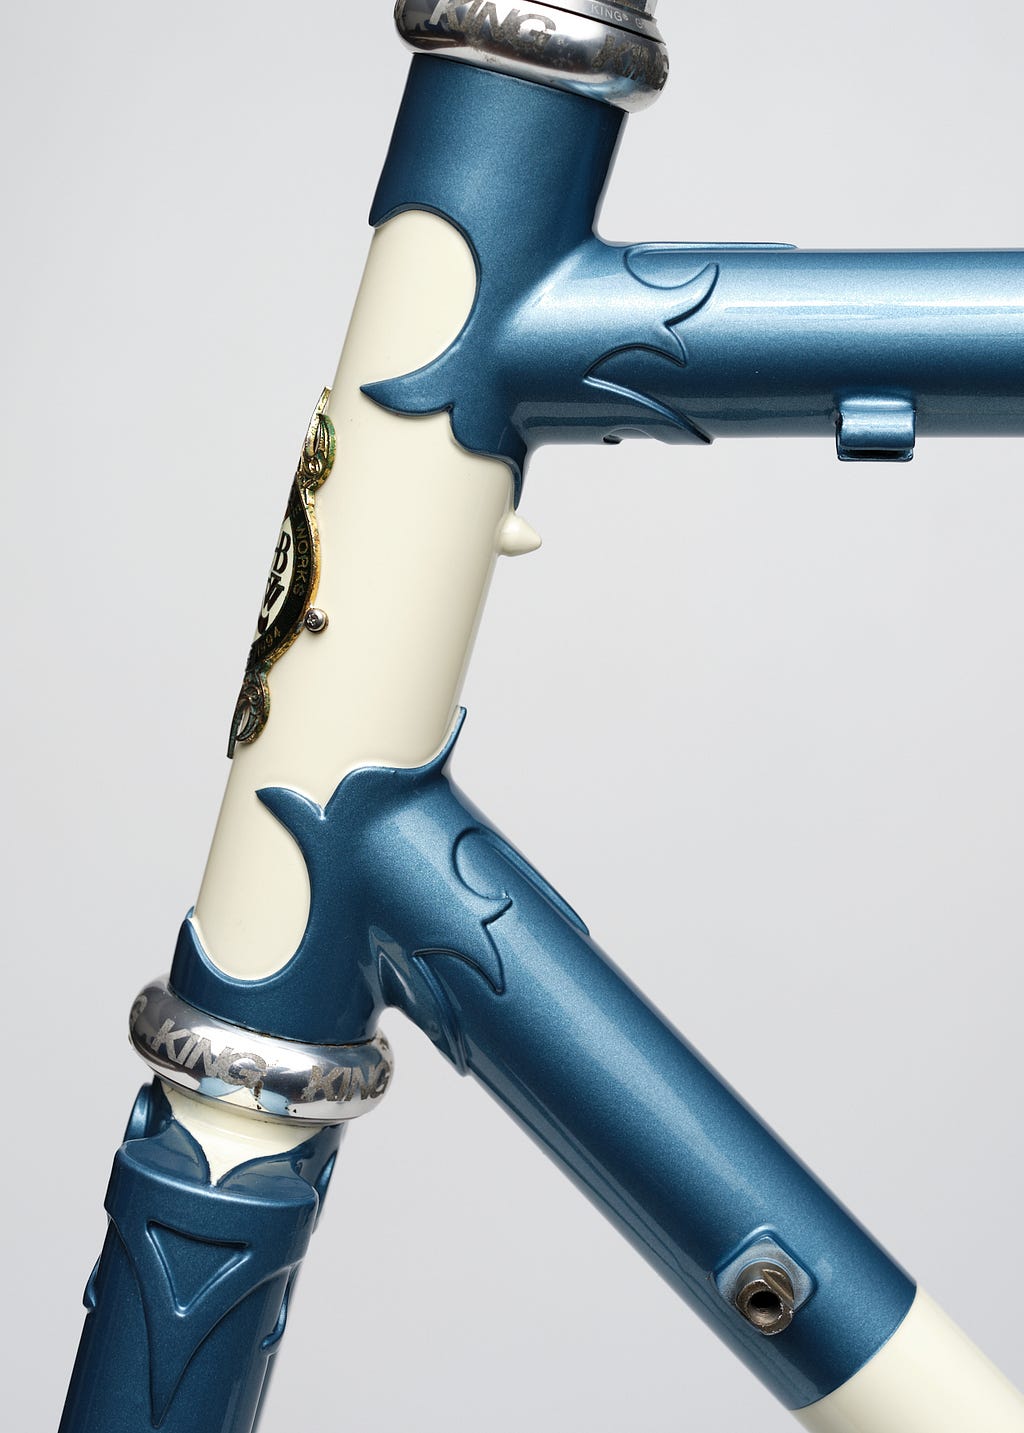 Head tube and lugs of a 1995 Rivendell Road bicycle